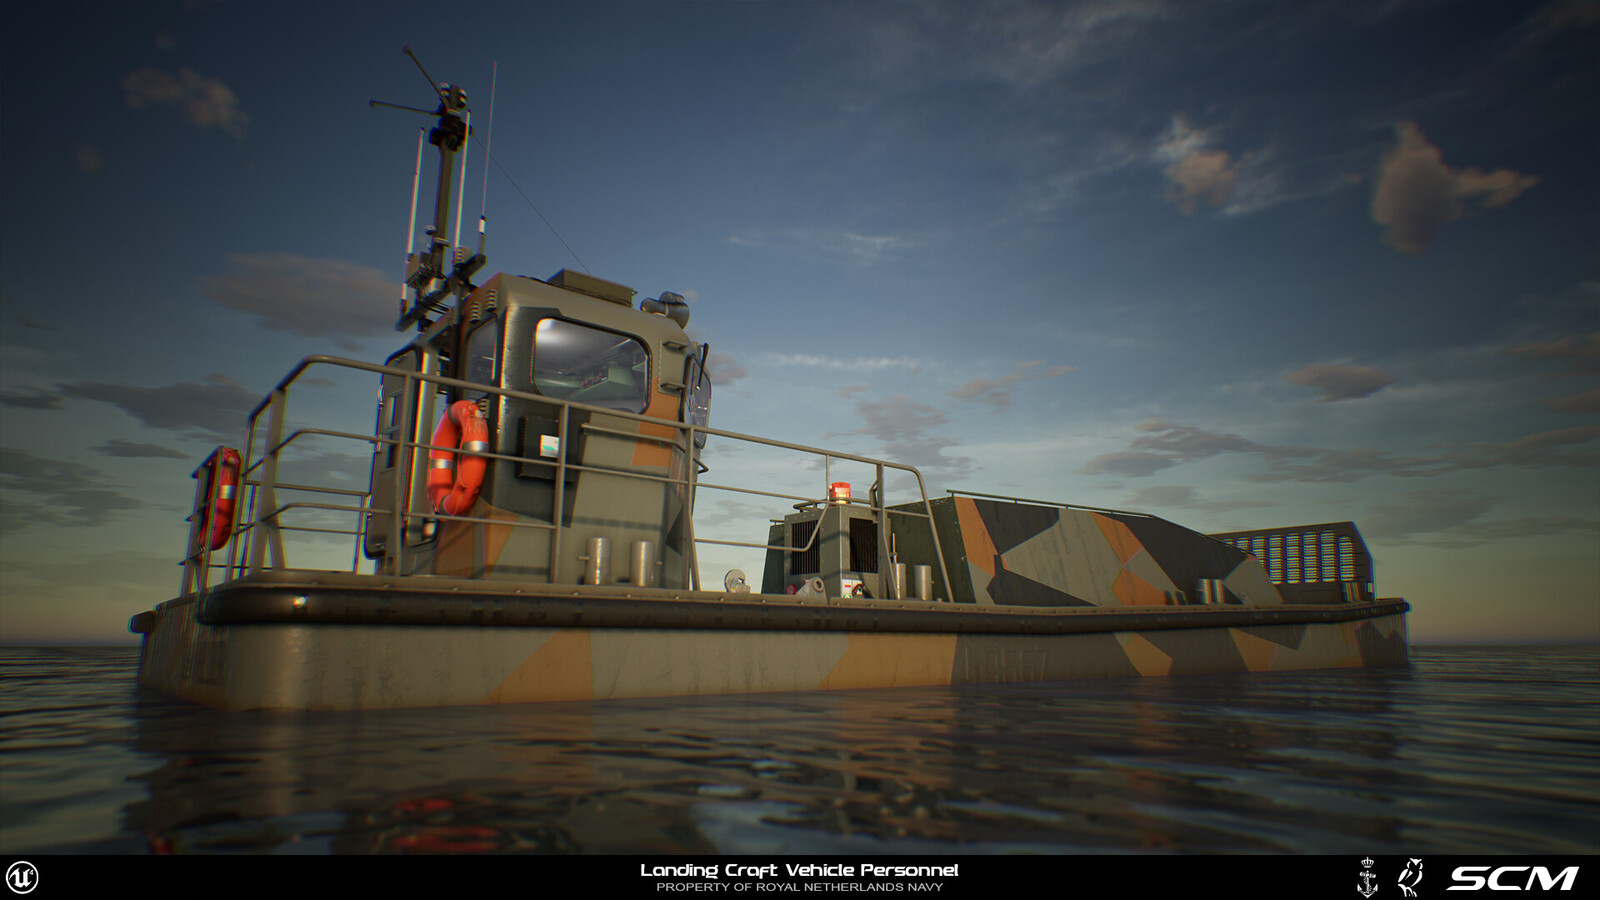 LCVP - Loads of shader work. Performant glass materials with localized reflections, water with caustics, water jet particle effects. Also created a lot of smart materials the other artists could use as a base library to build their materials on.